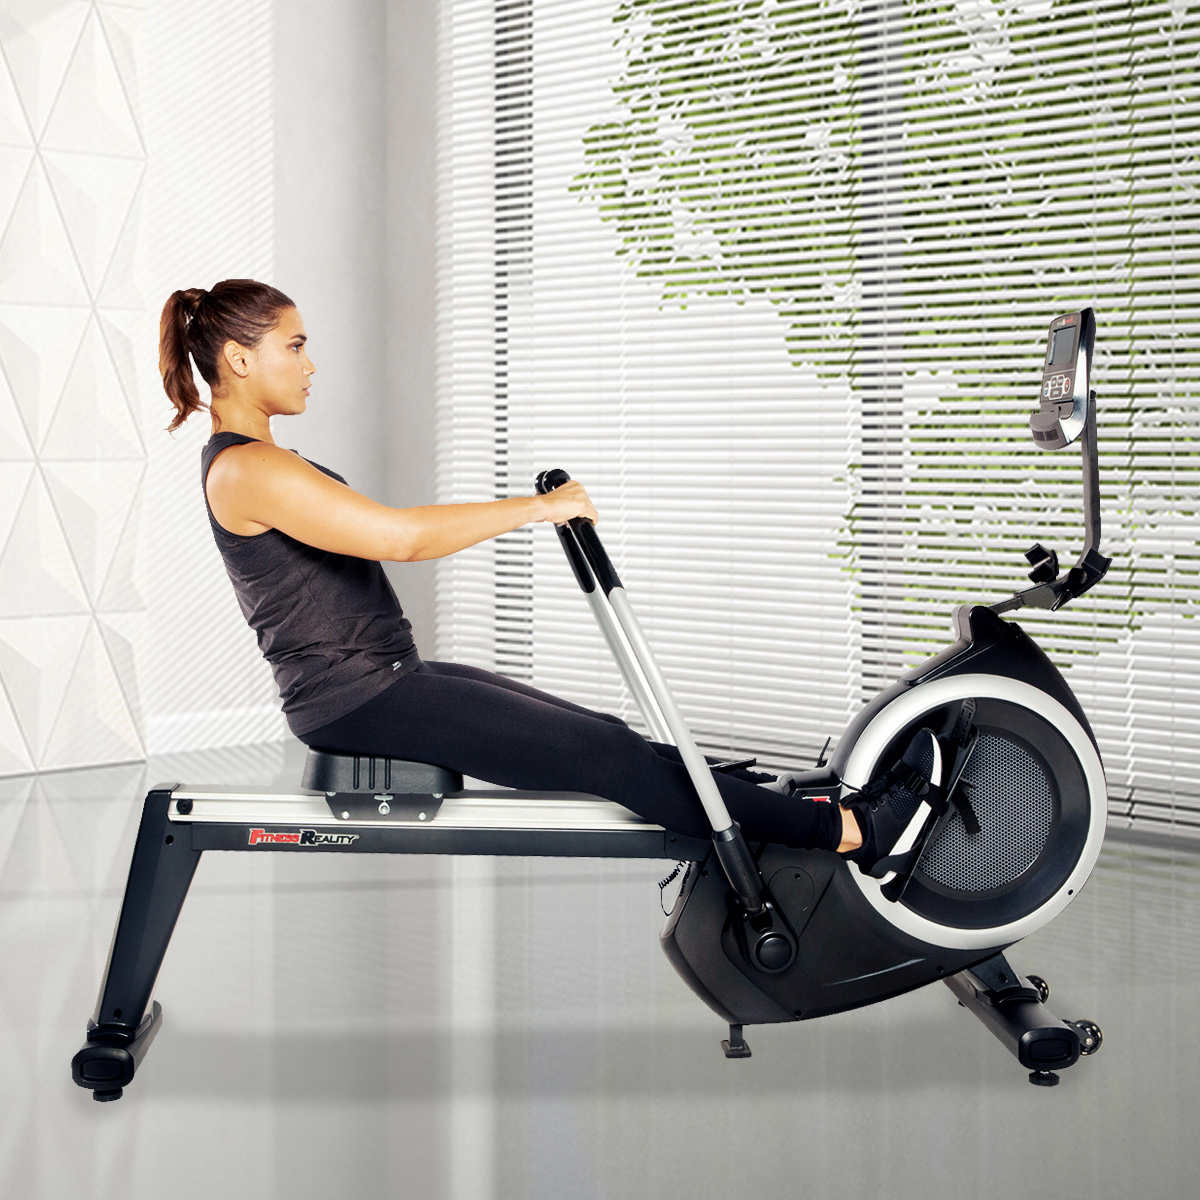 Fitness Reality 4000MR Magnetic Rower Reviews